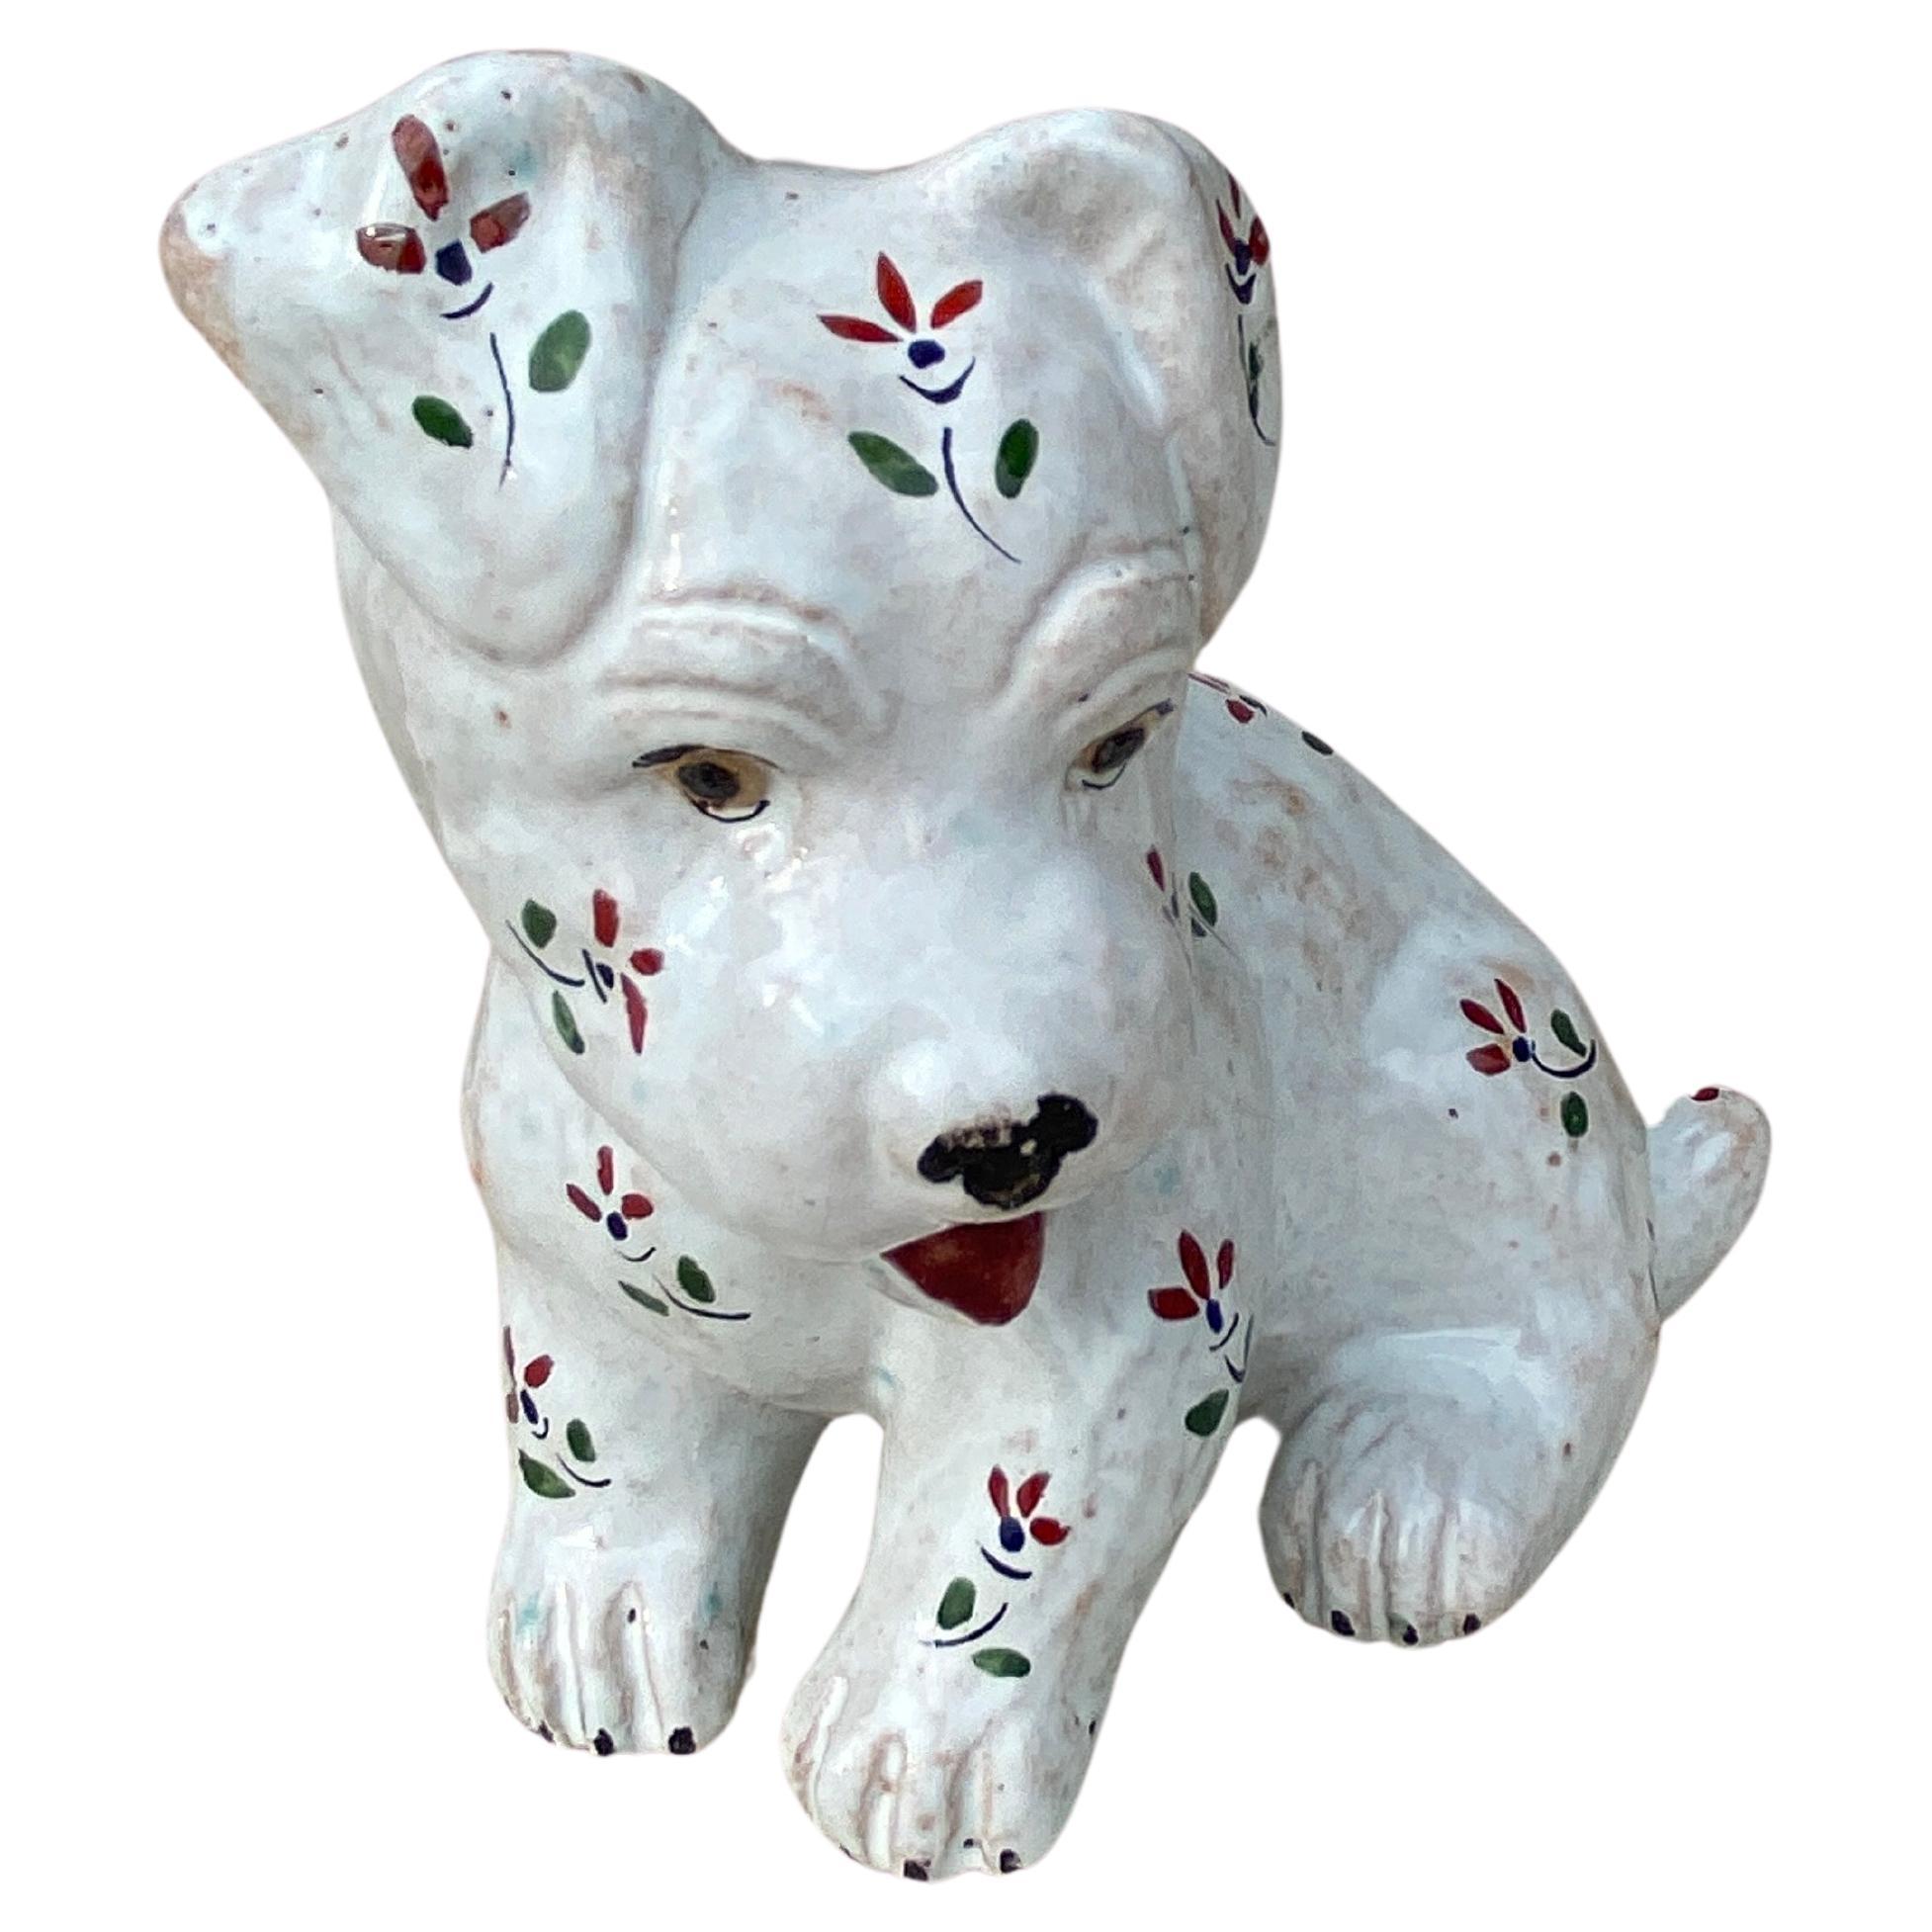 French Terra Cotta Majolica Dog Normandy Circa 1900.
decorated with Cornflowers called Barbeaux in France.
in the style and period of Emile Galle.